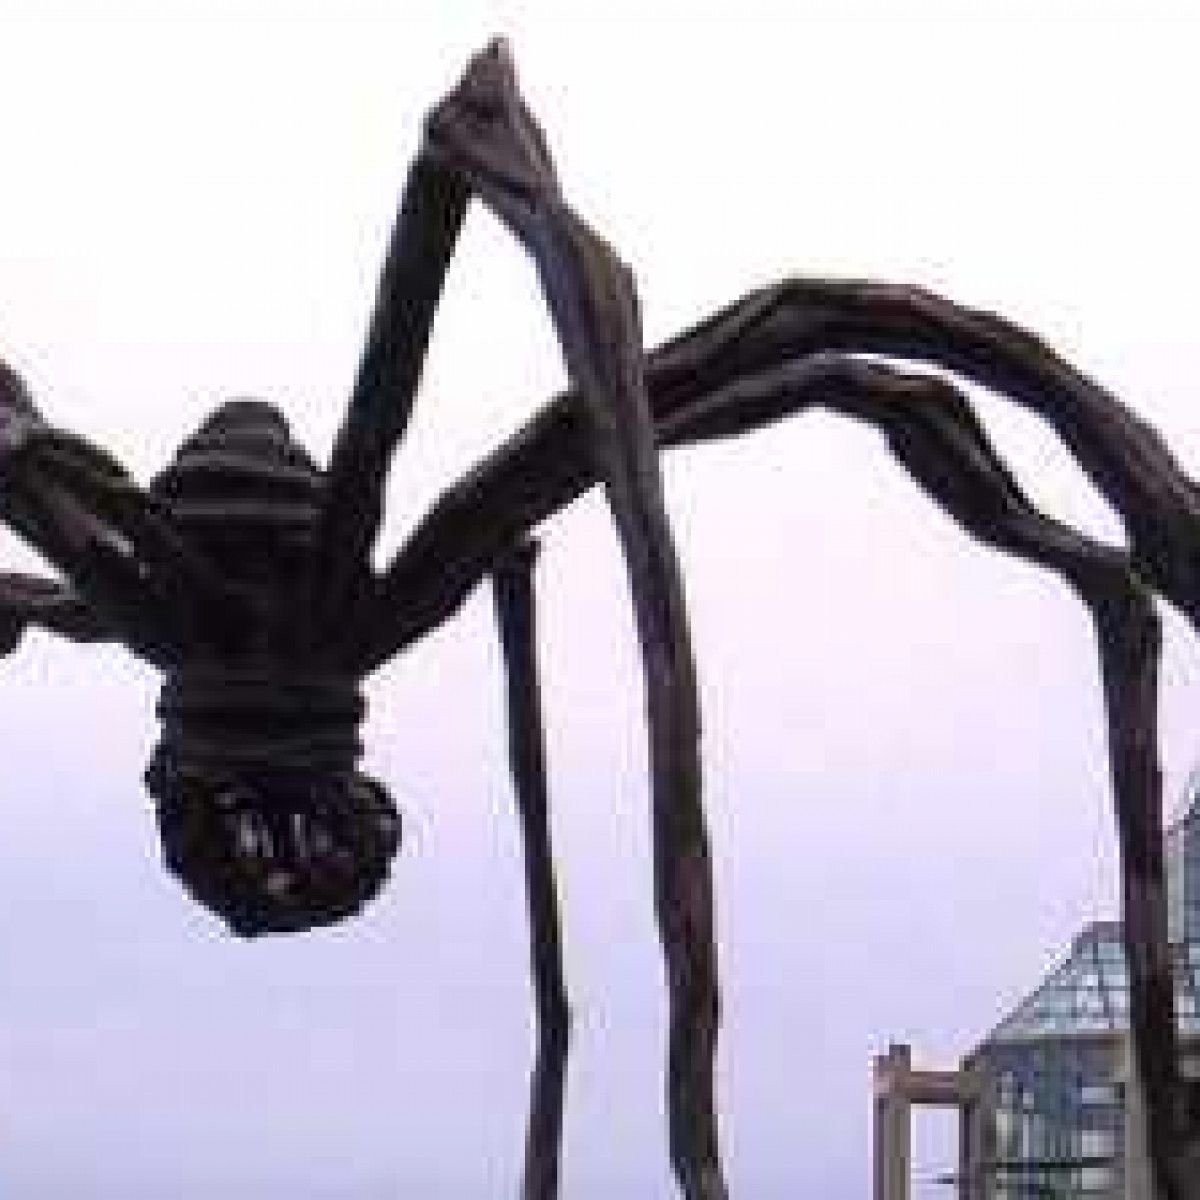 Beyond Spiders: The Art of Louise Bourgeois